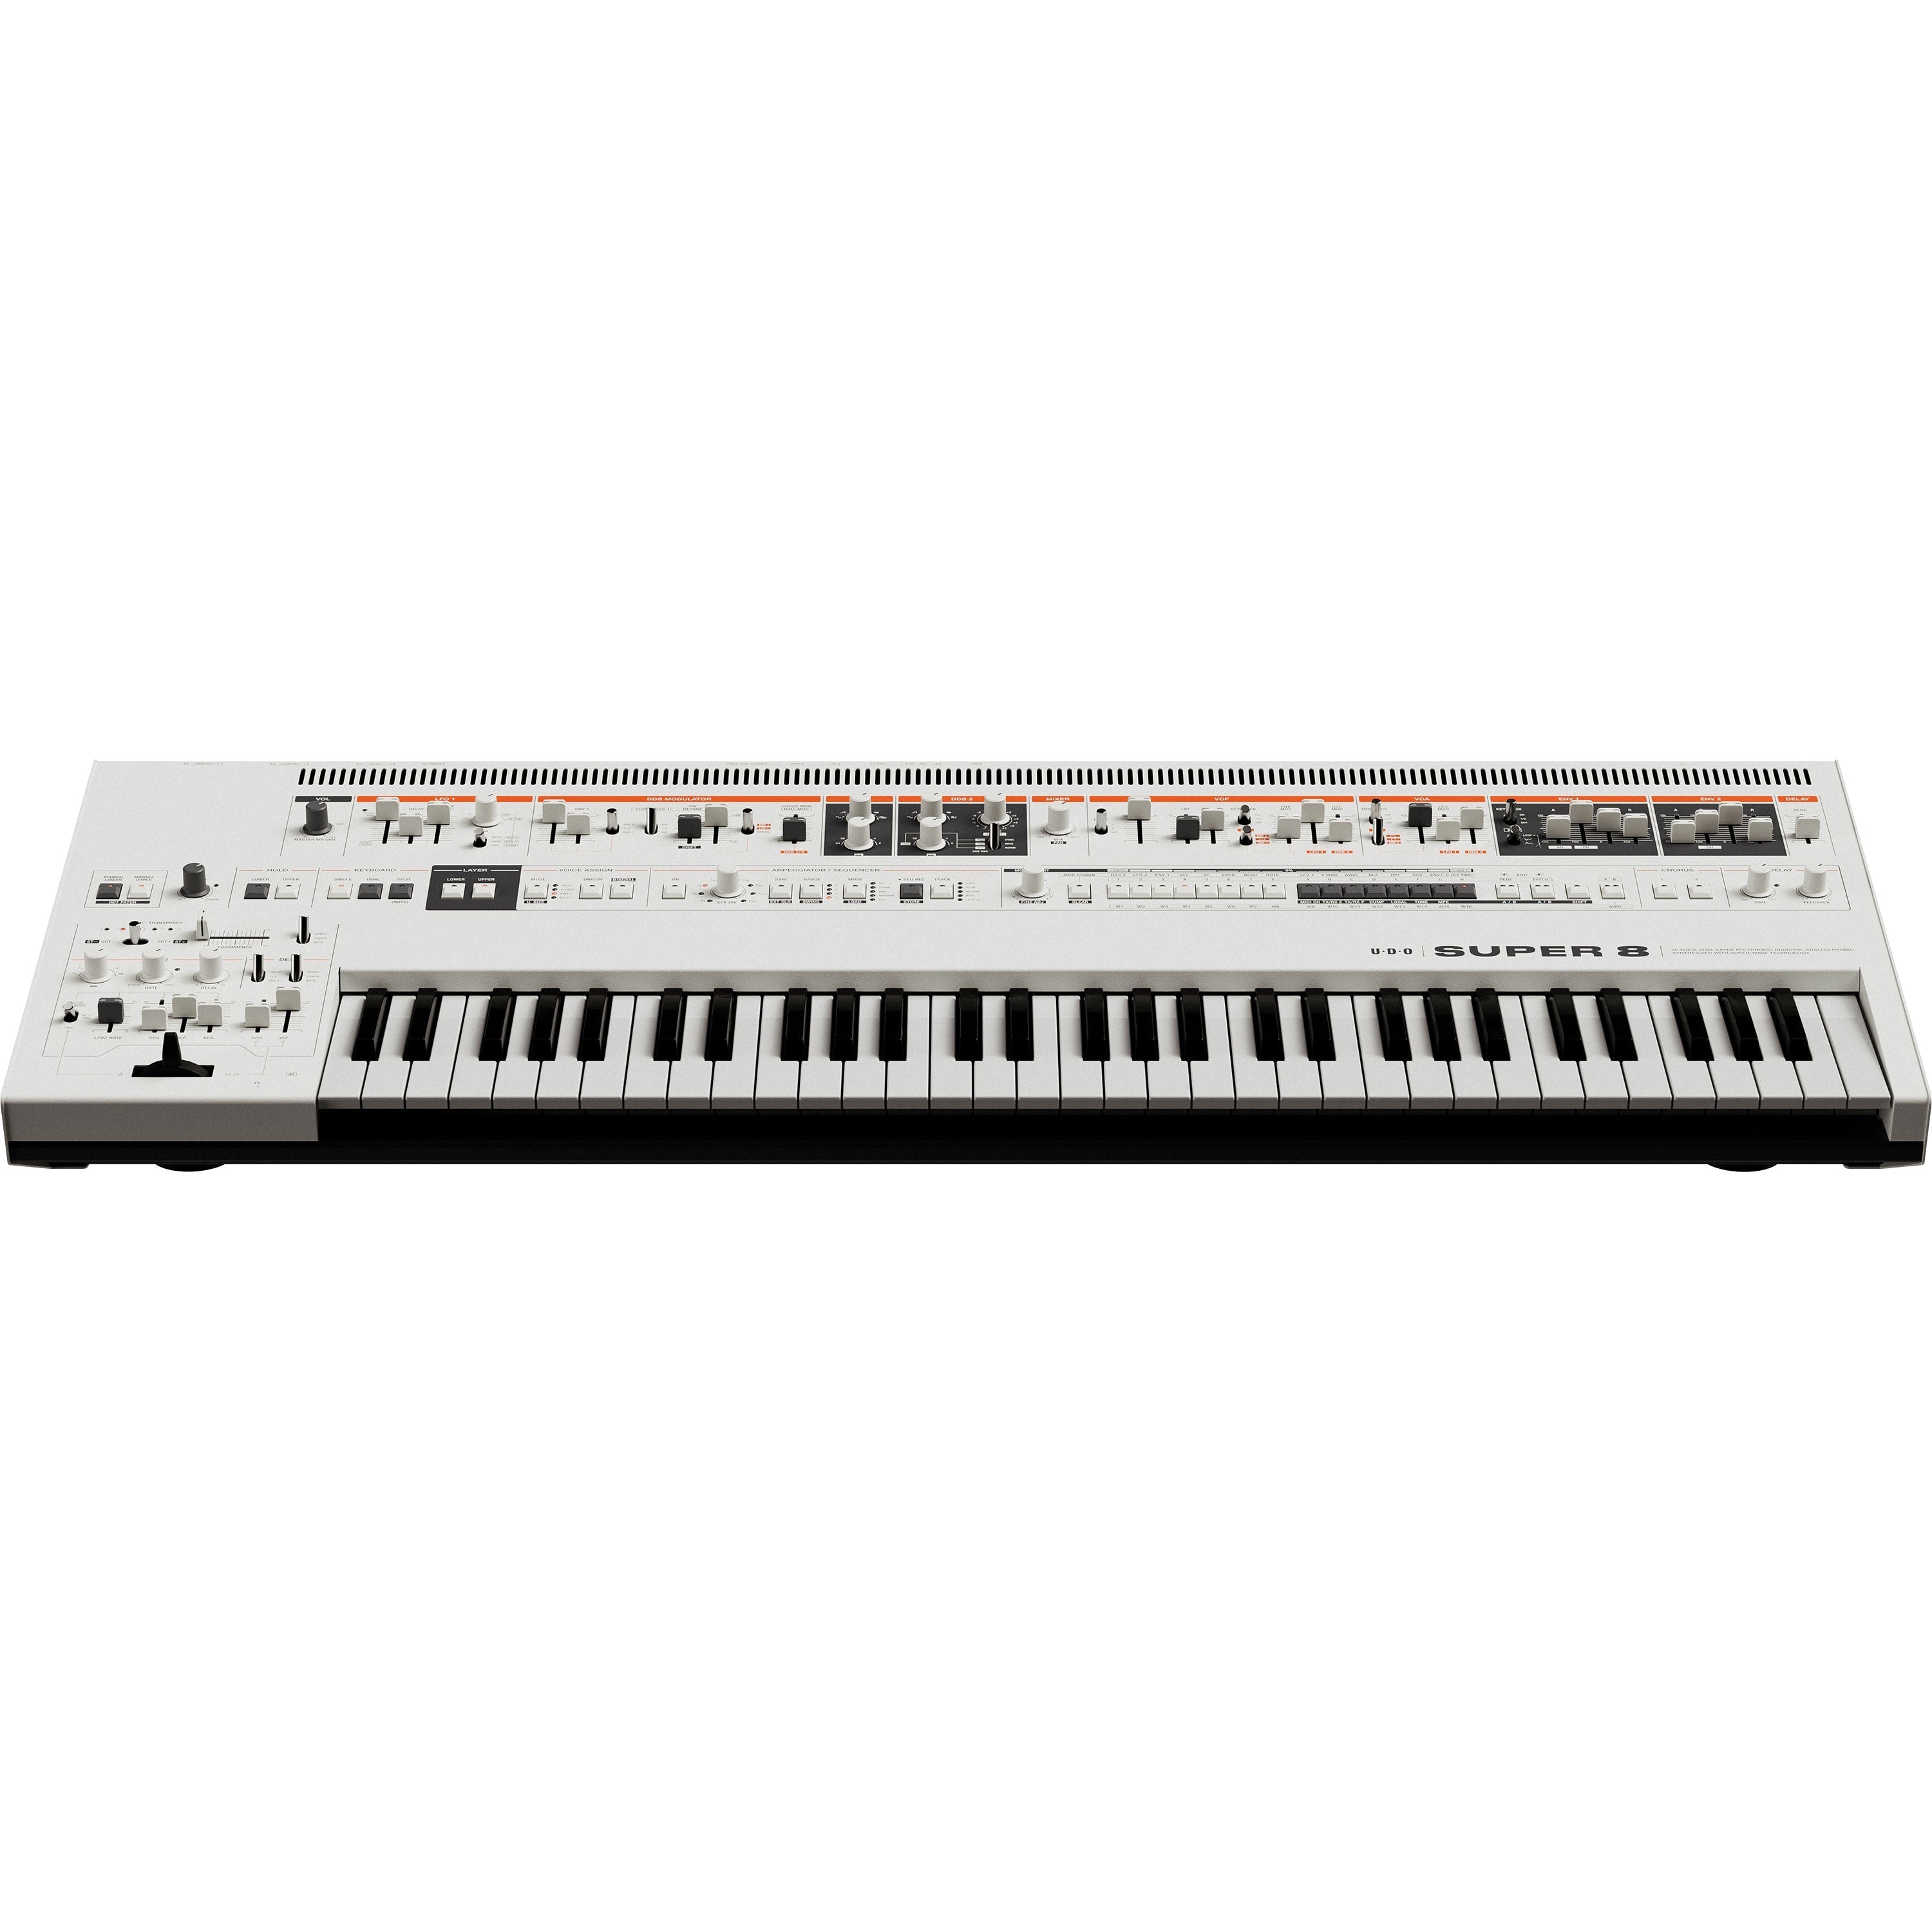 UDO Audio Super 8 16-Voice Bi-Timbral Keyboard Synthesizer - White View 4